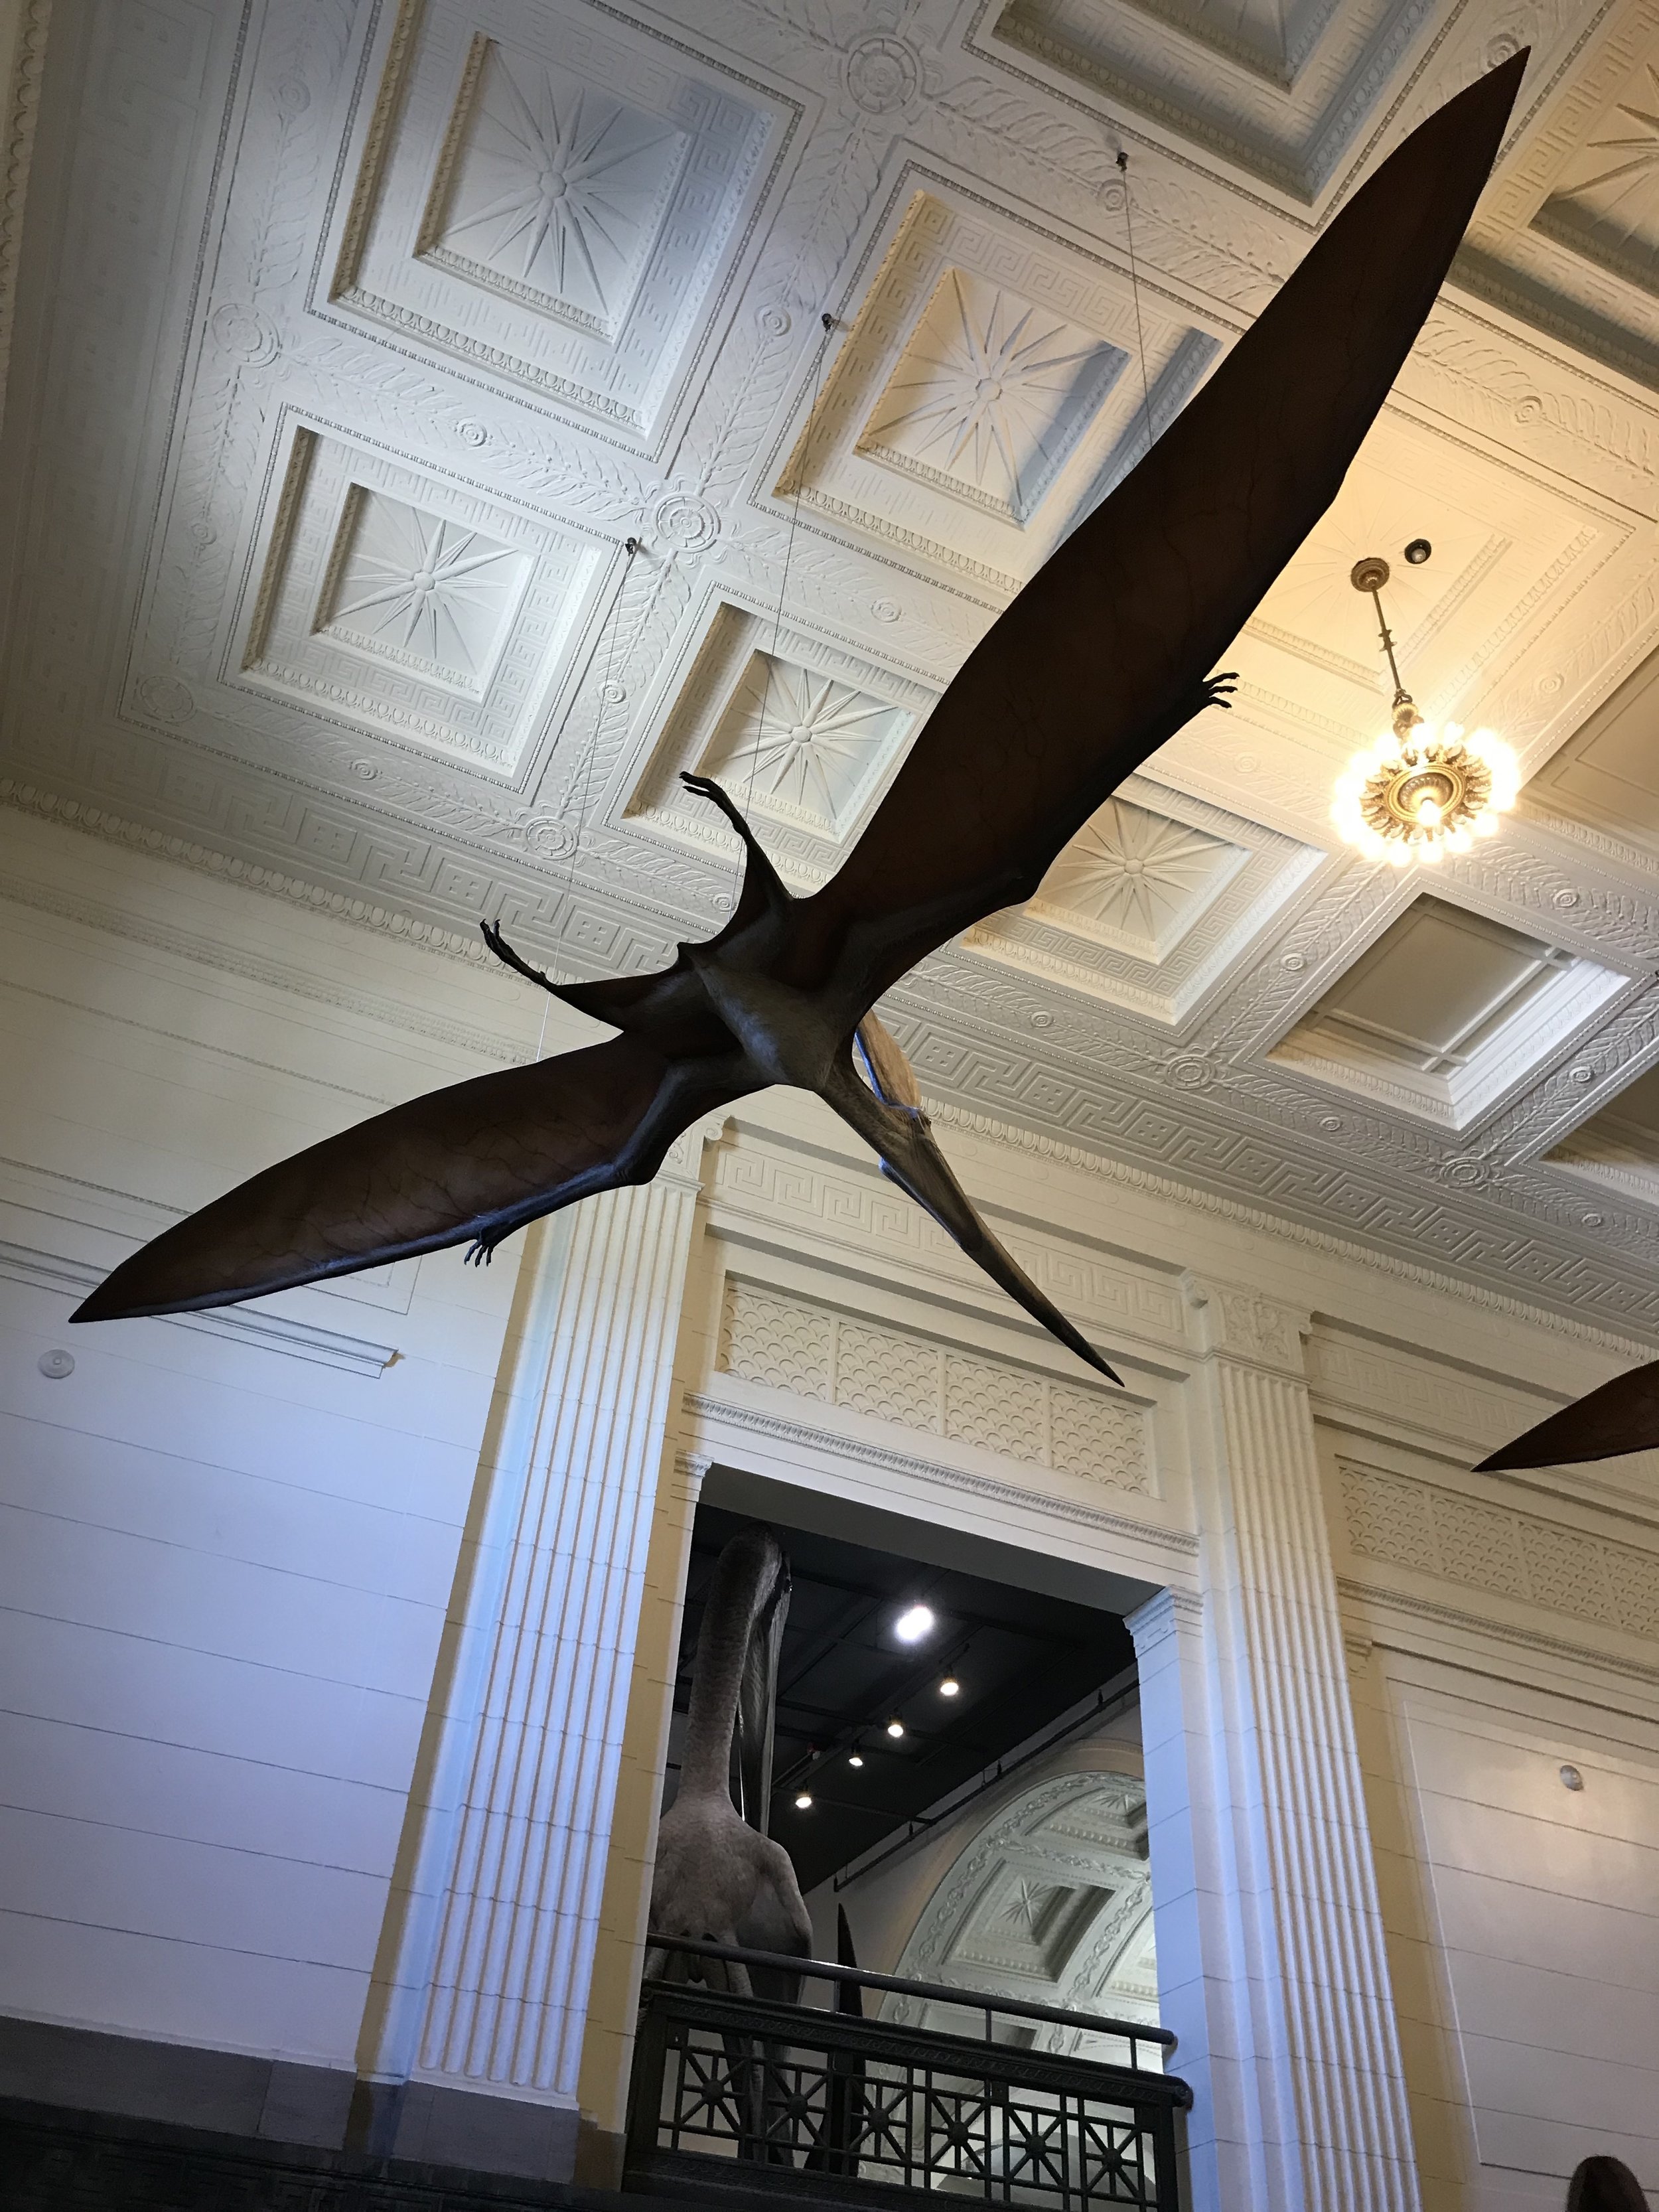 Pterosaurs at the Field Museum go on Display